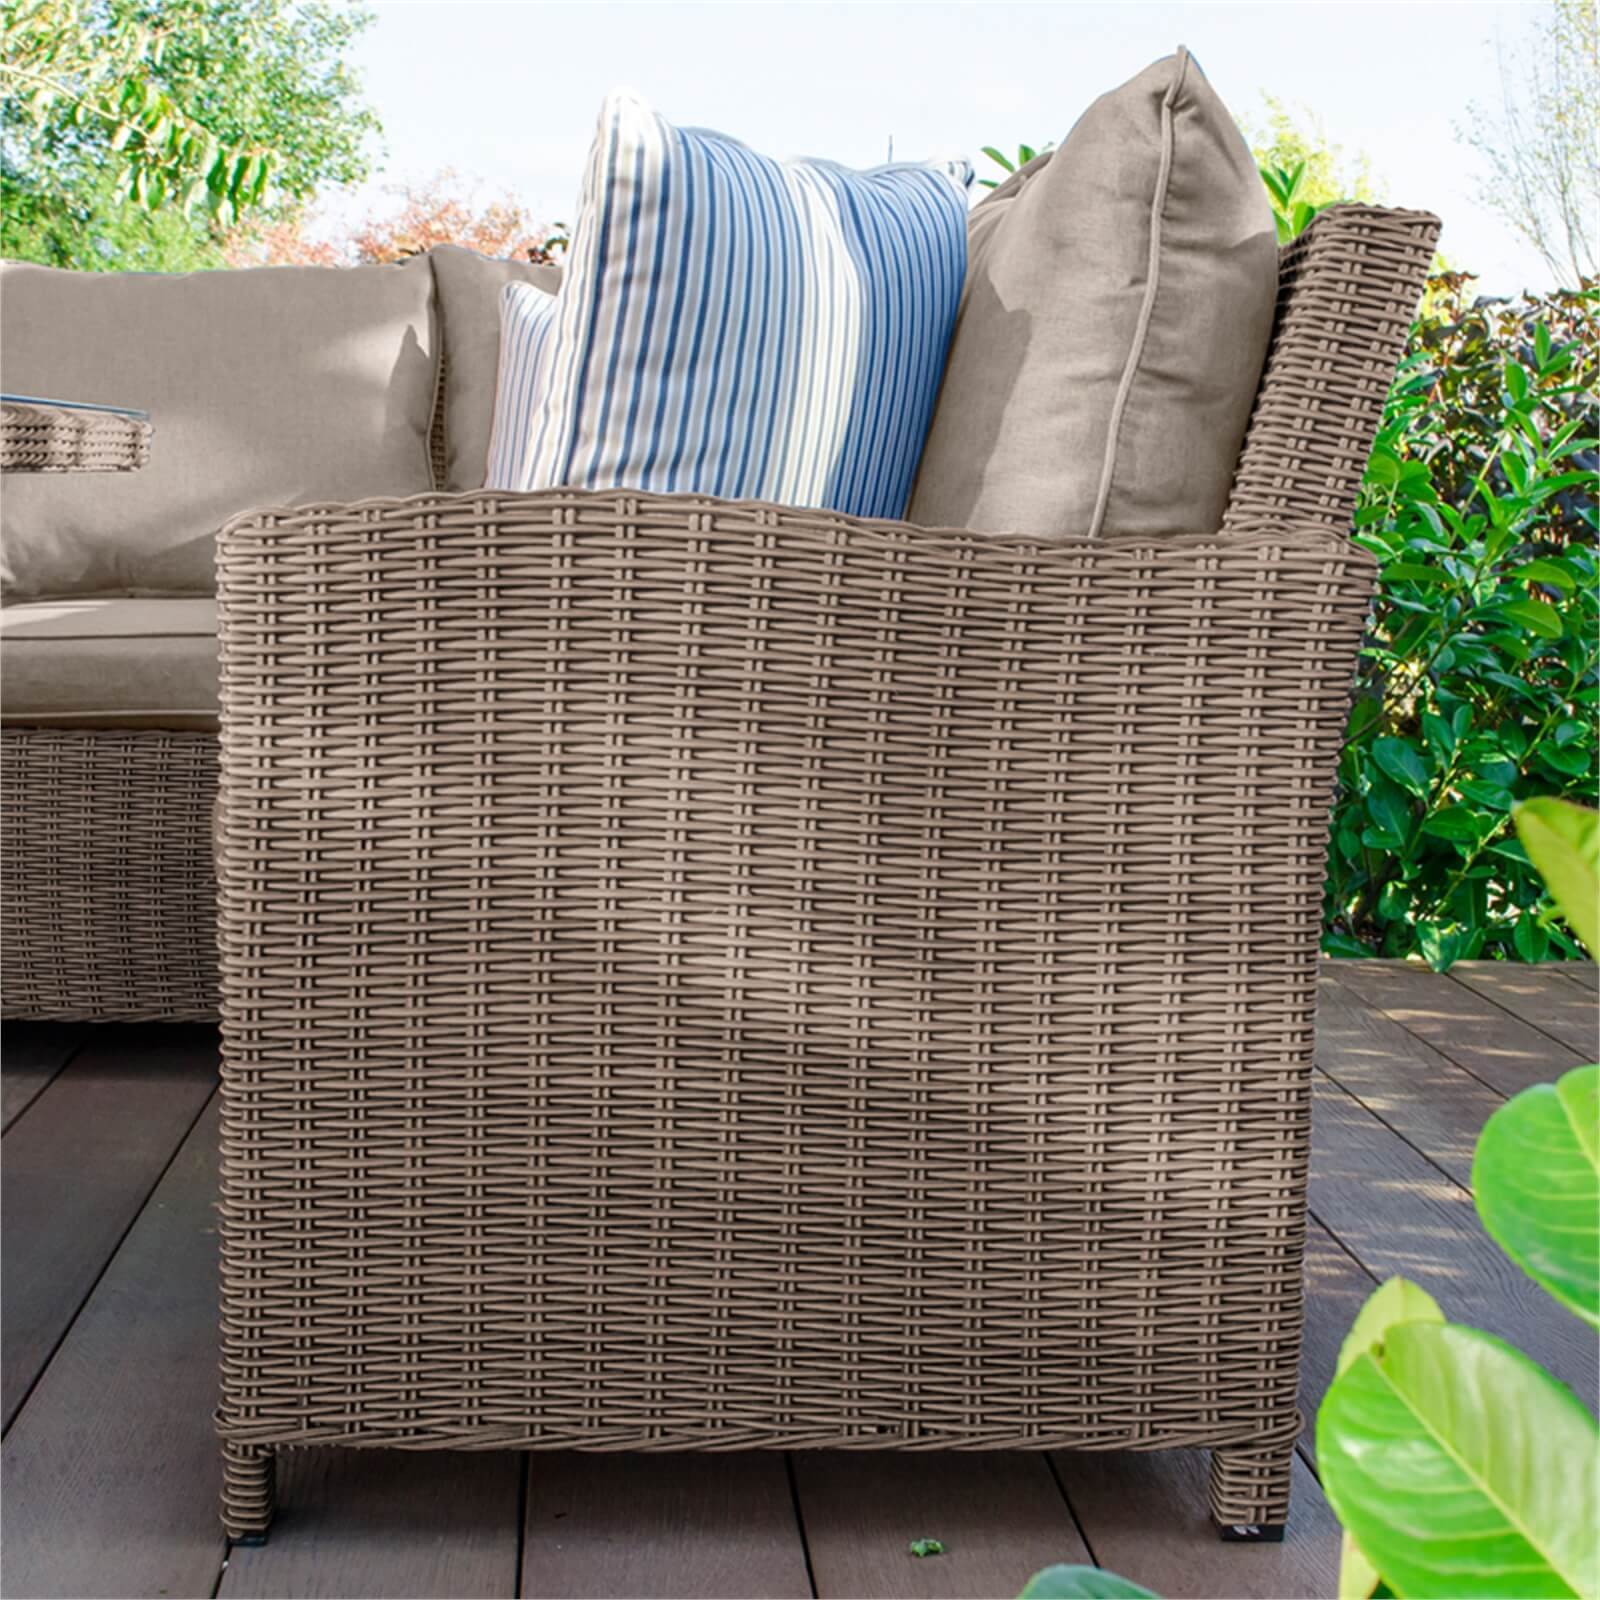 Nova Belmont Rising Casual Rattan Dining Right in Natural